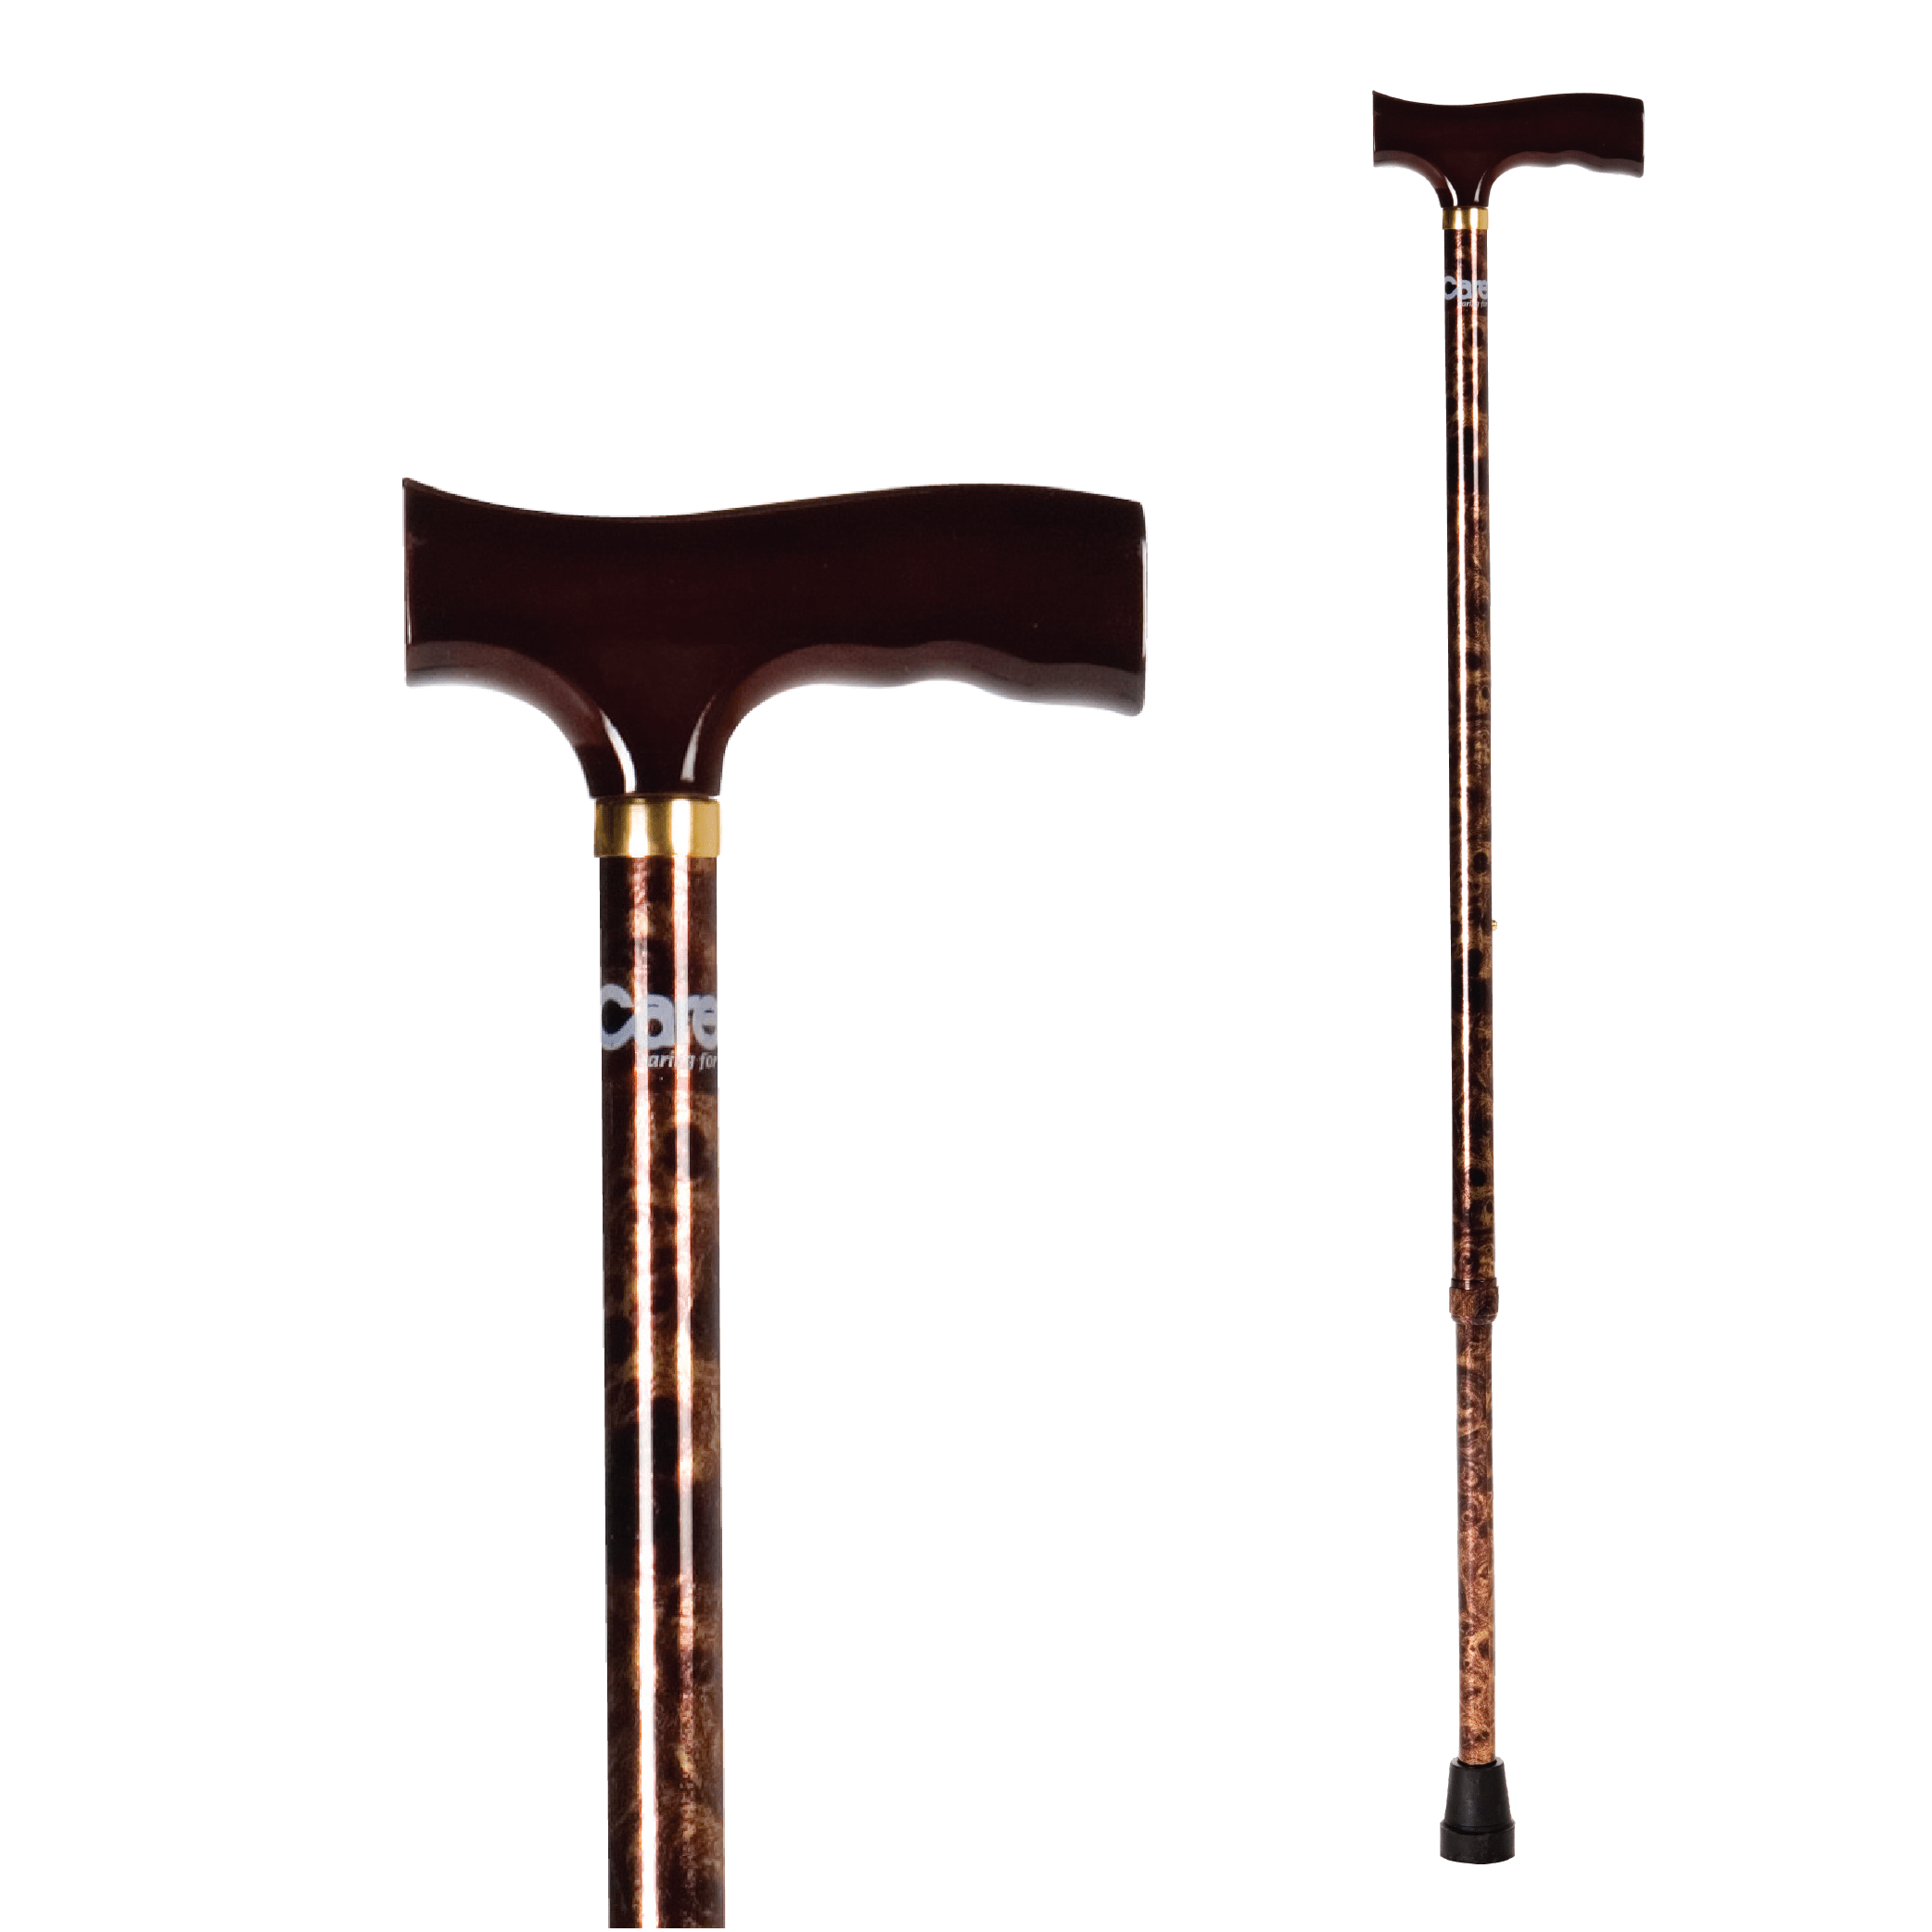 Carex Designer Derby Handle Folding Walking Cane for All Occasions